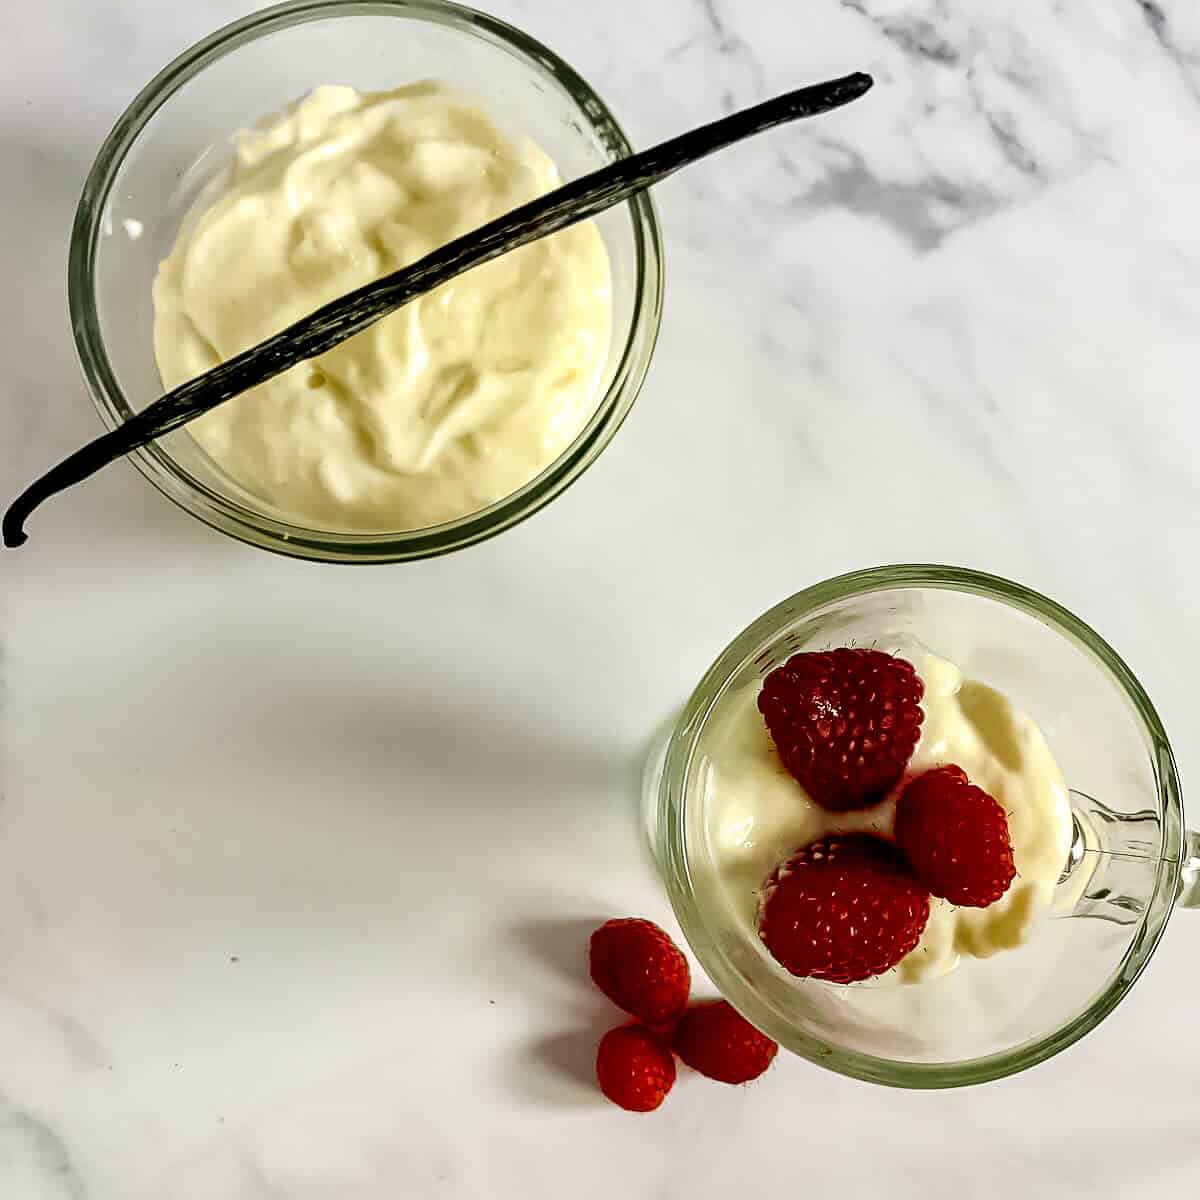 Vanilla pudding in a glass mug with raspberries next to another glass bowl of pudding with a vanilla bean from overhead